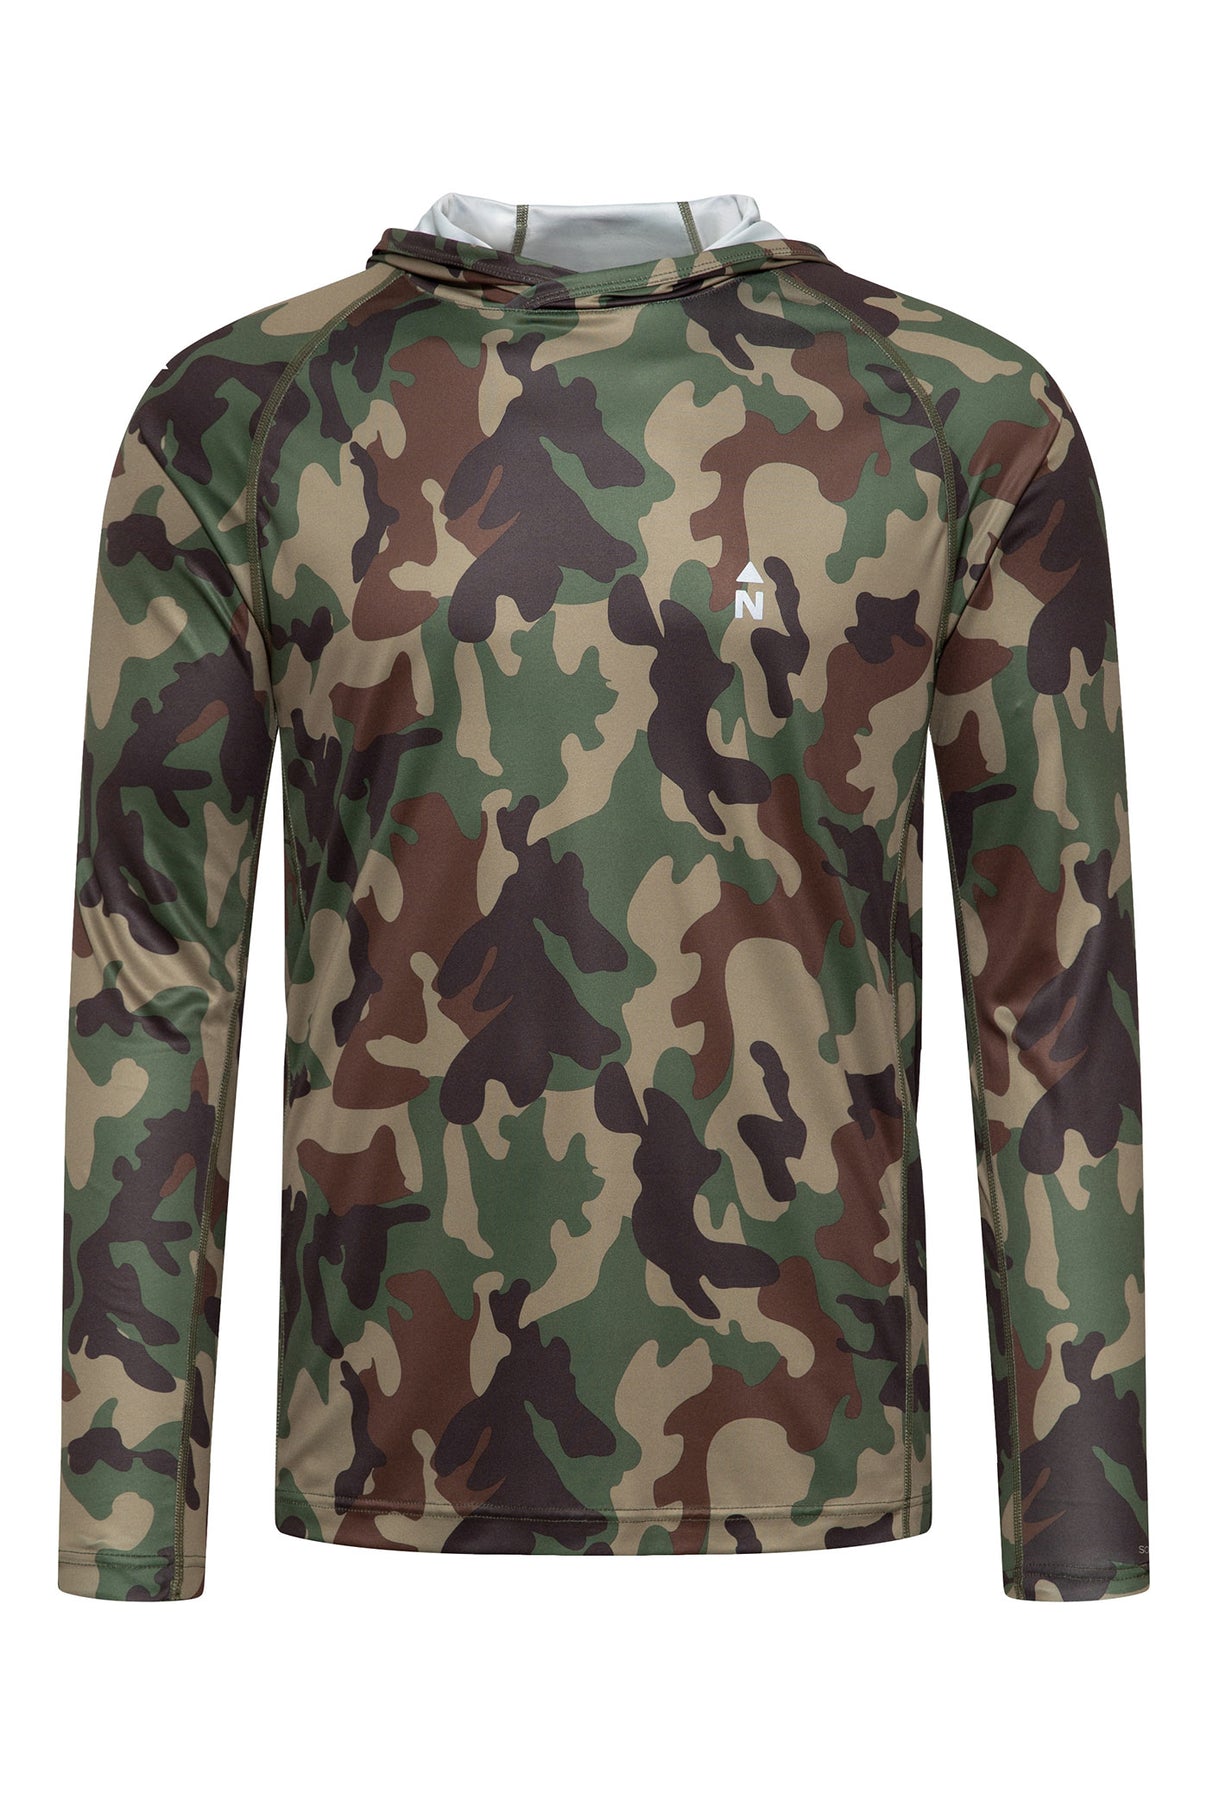 Camo Hunting Clothes Pullover Sun protection Anti-UV Breathable Quick –